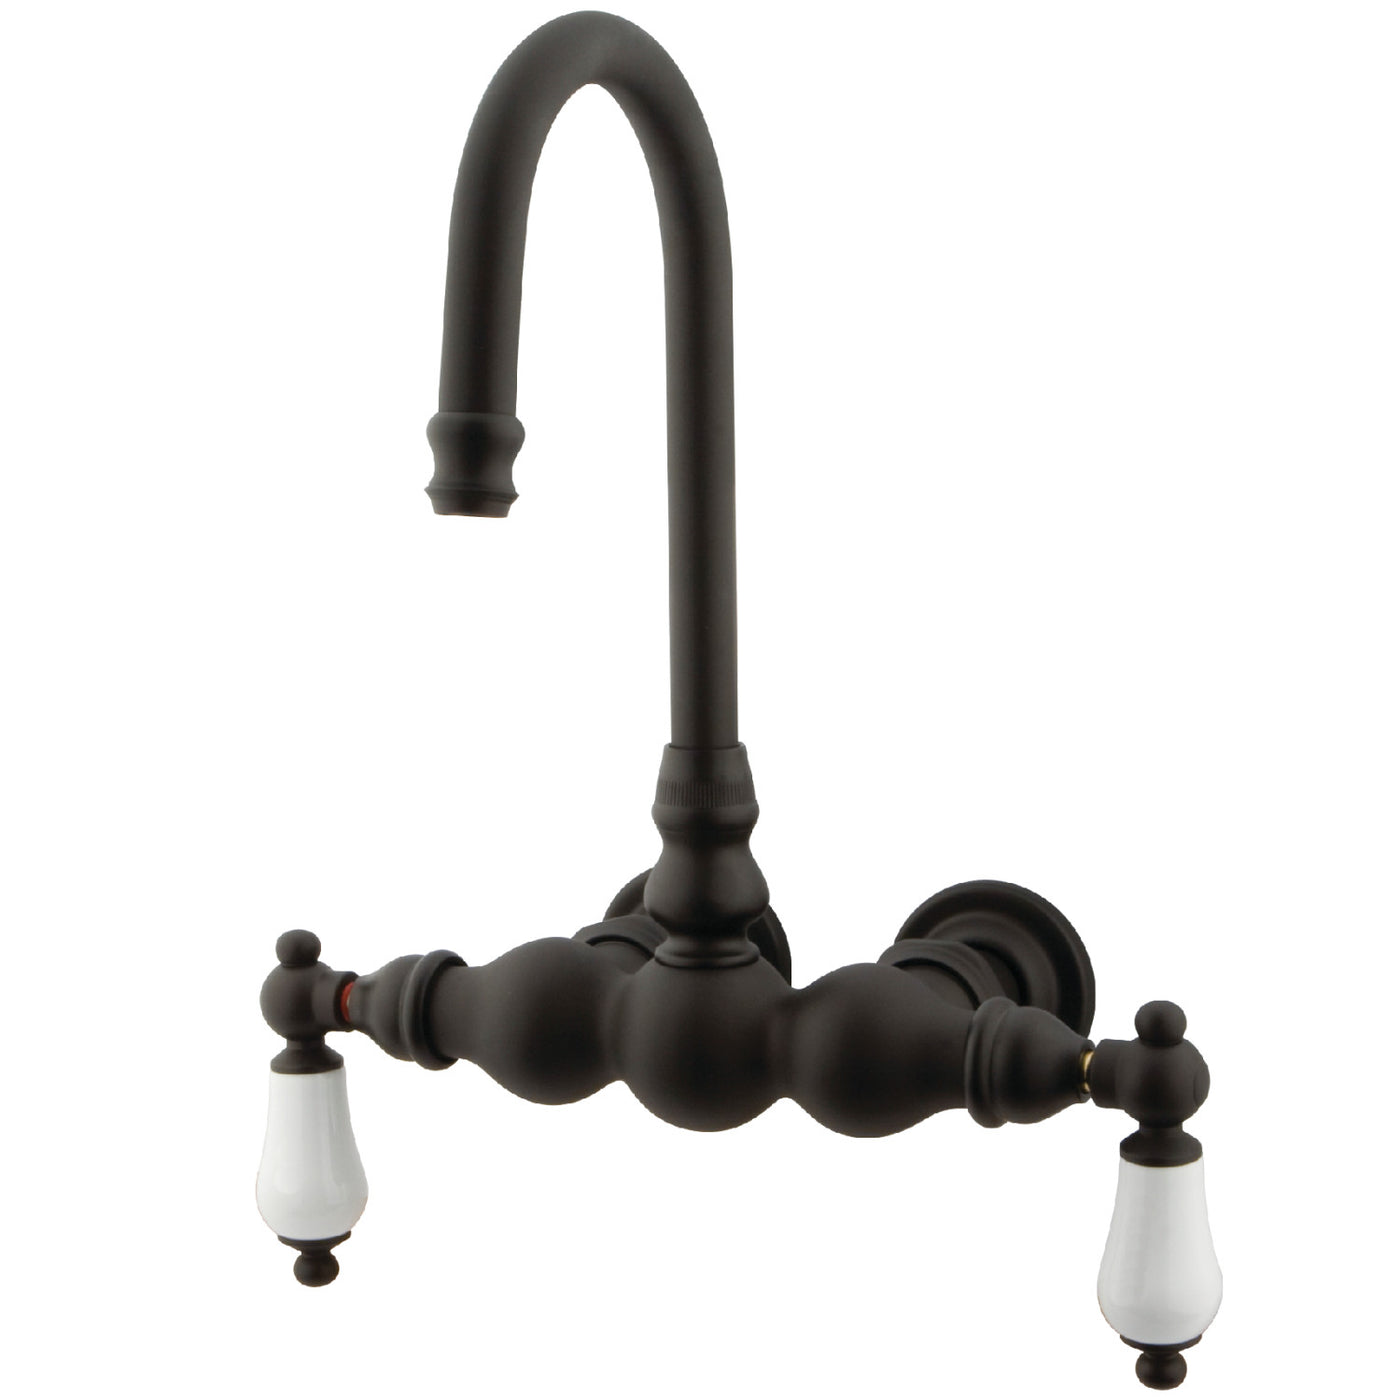 Elements of Design DT0015PL 3-3/8-Inch Wall Mount Tub Faucet, Oil Rubbed Bronze